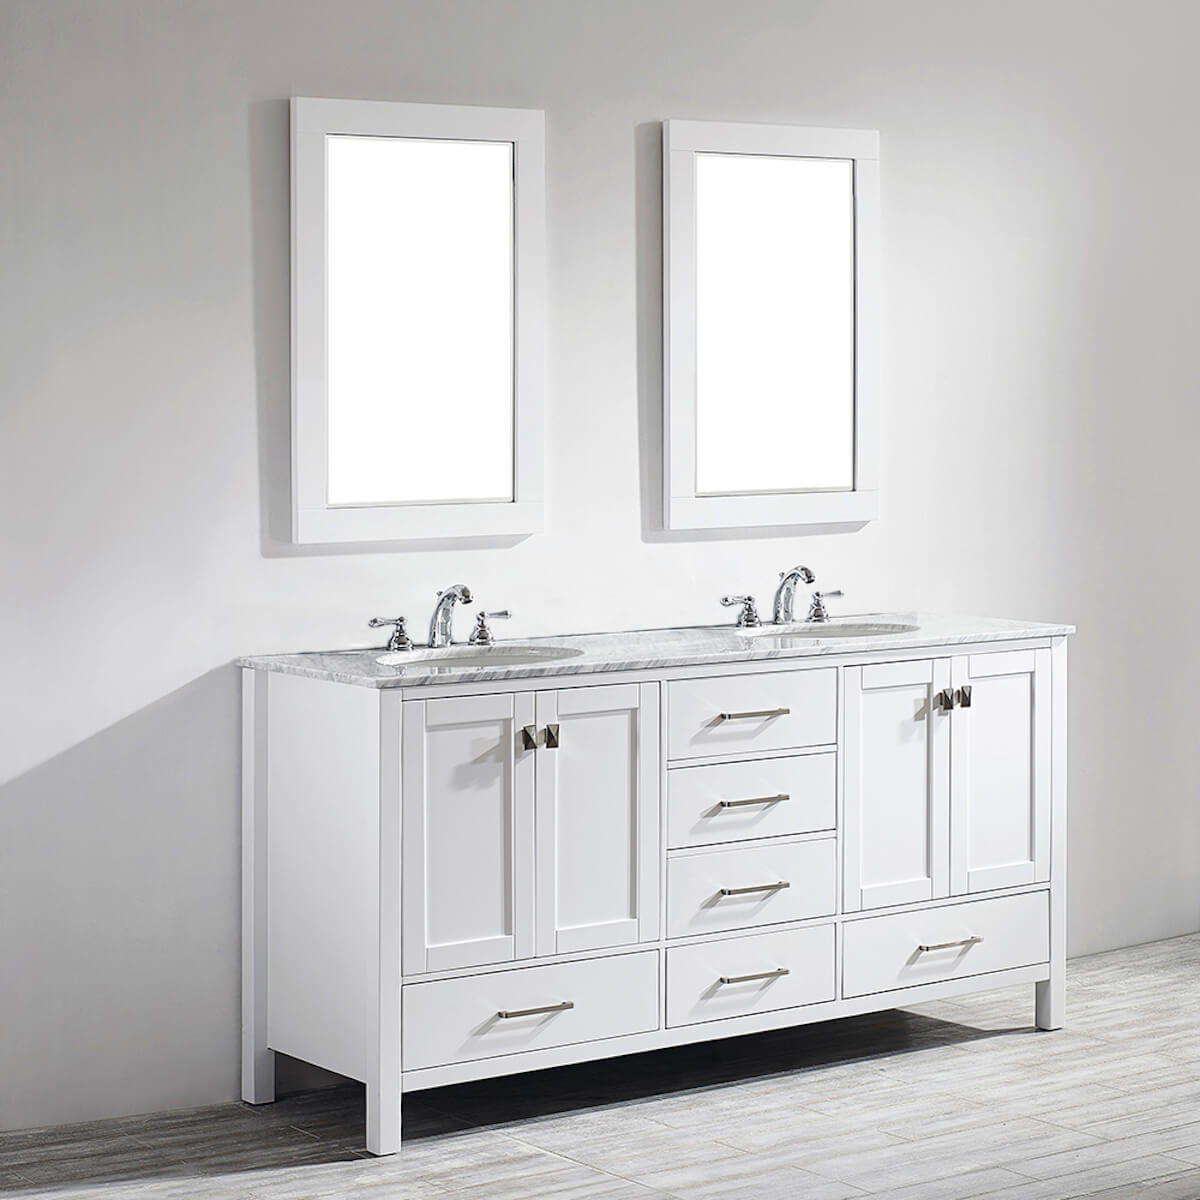 Vinnova Gela 72" White Double Vanity with Carrara White Marble Countertop With Mirror Left Side 723072-WH-CA